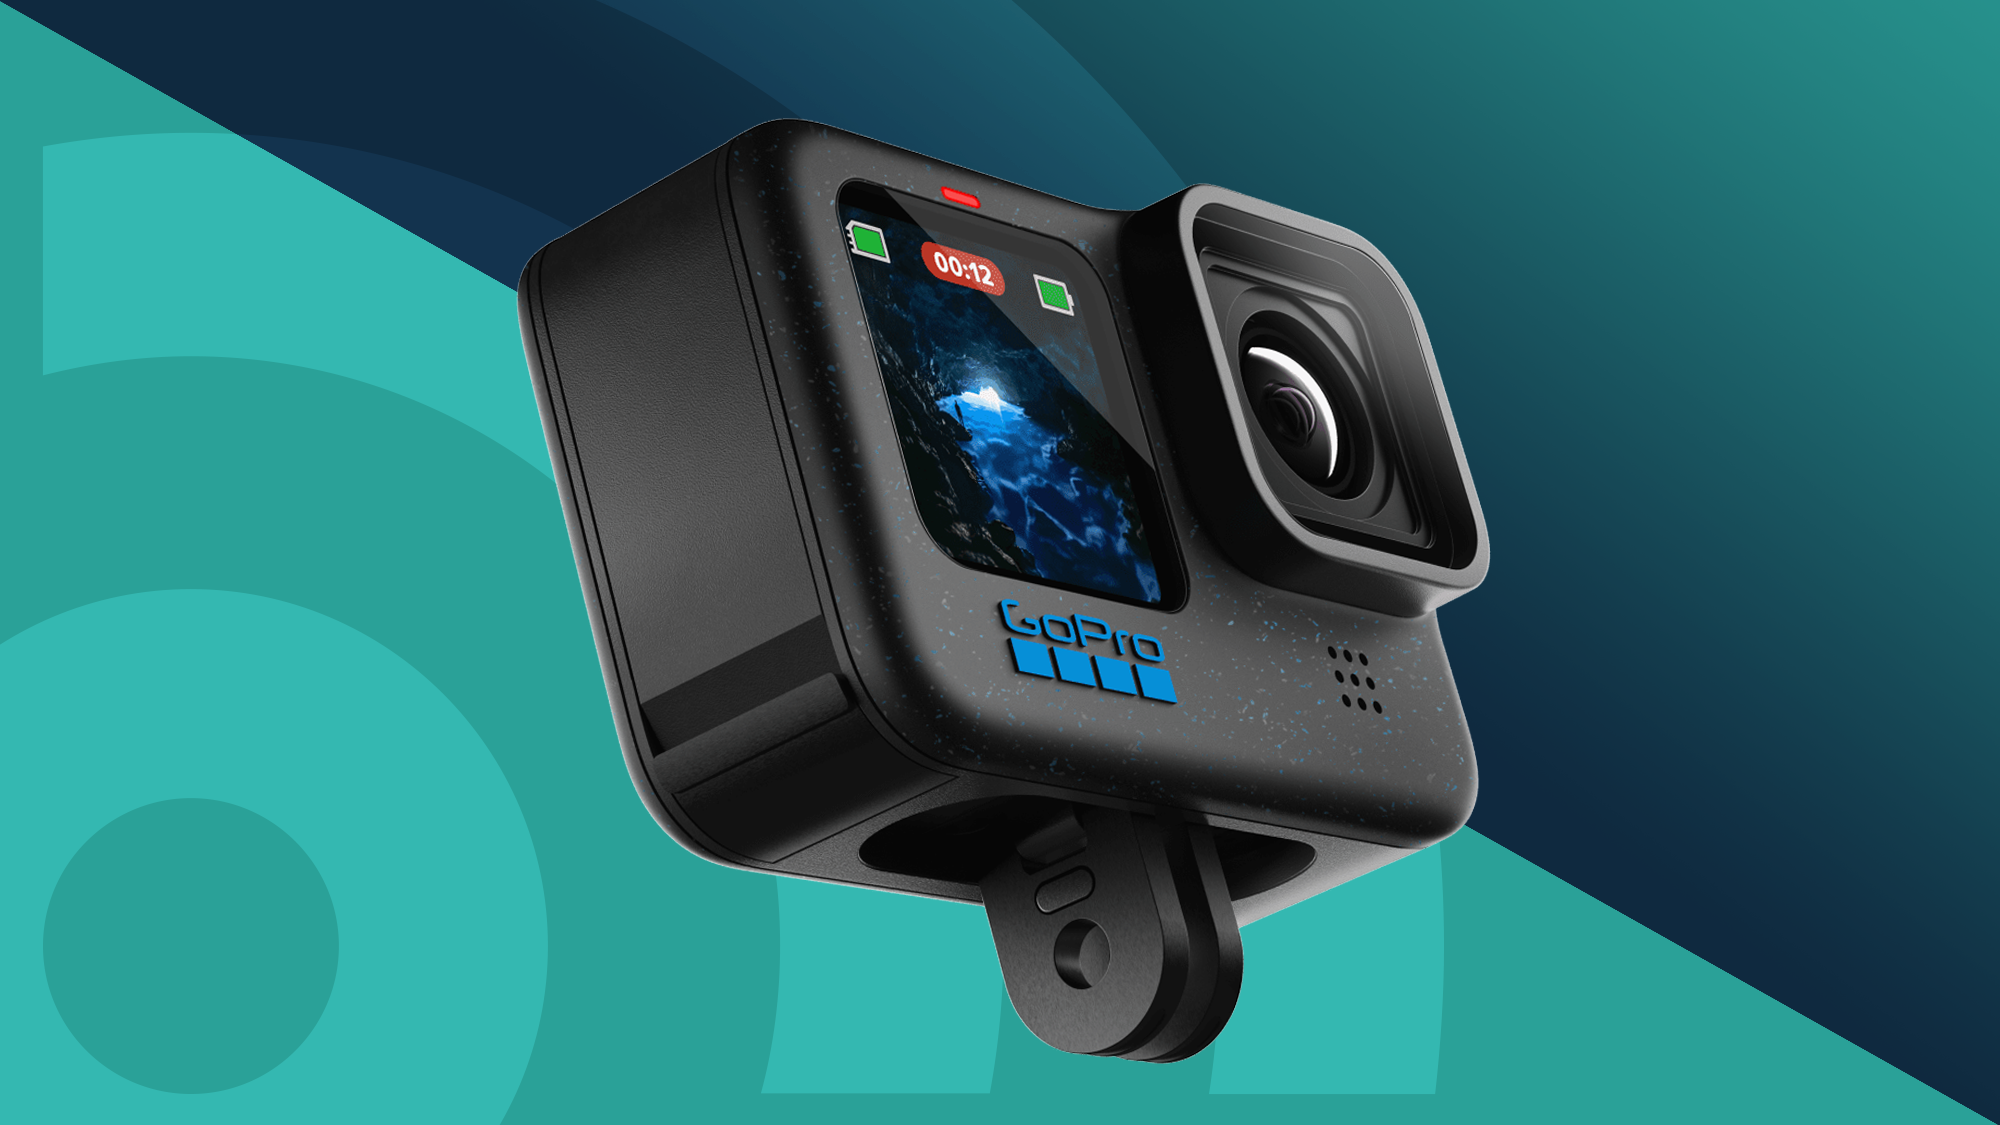 Best Action Camera 2024 + How to Choose - Finding the Universe